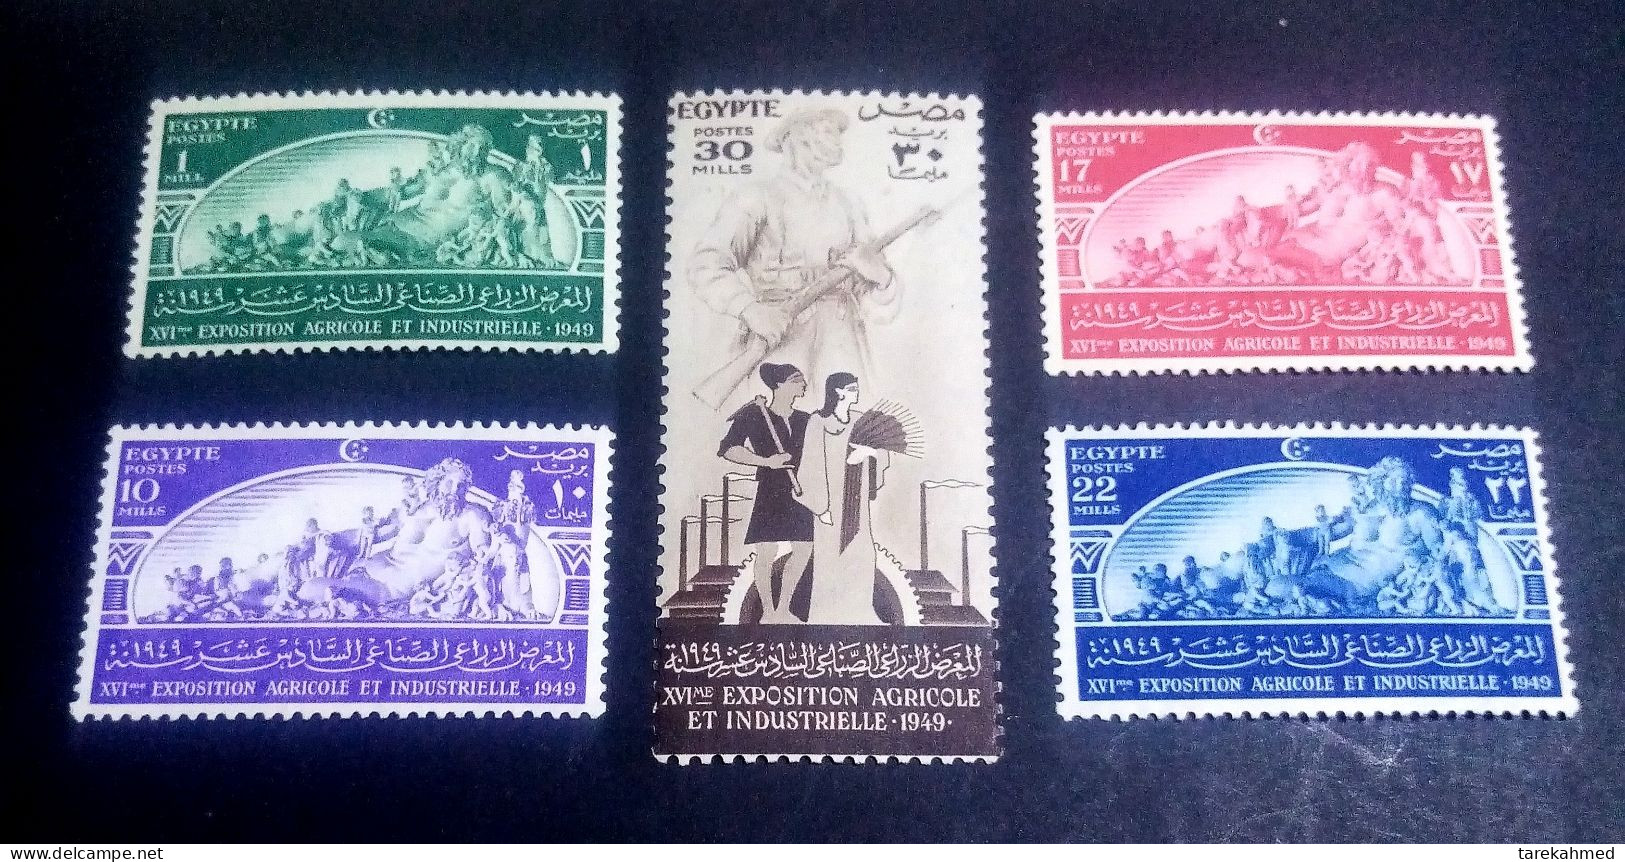 EGYPT KINGDOM 1949 , AGRICULTURE & INDUSTRY EXPOSITION S.G. 352-356 . Super MNH - Neufs